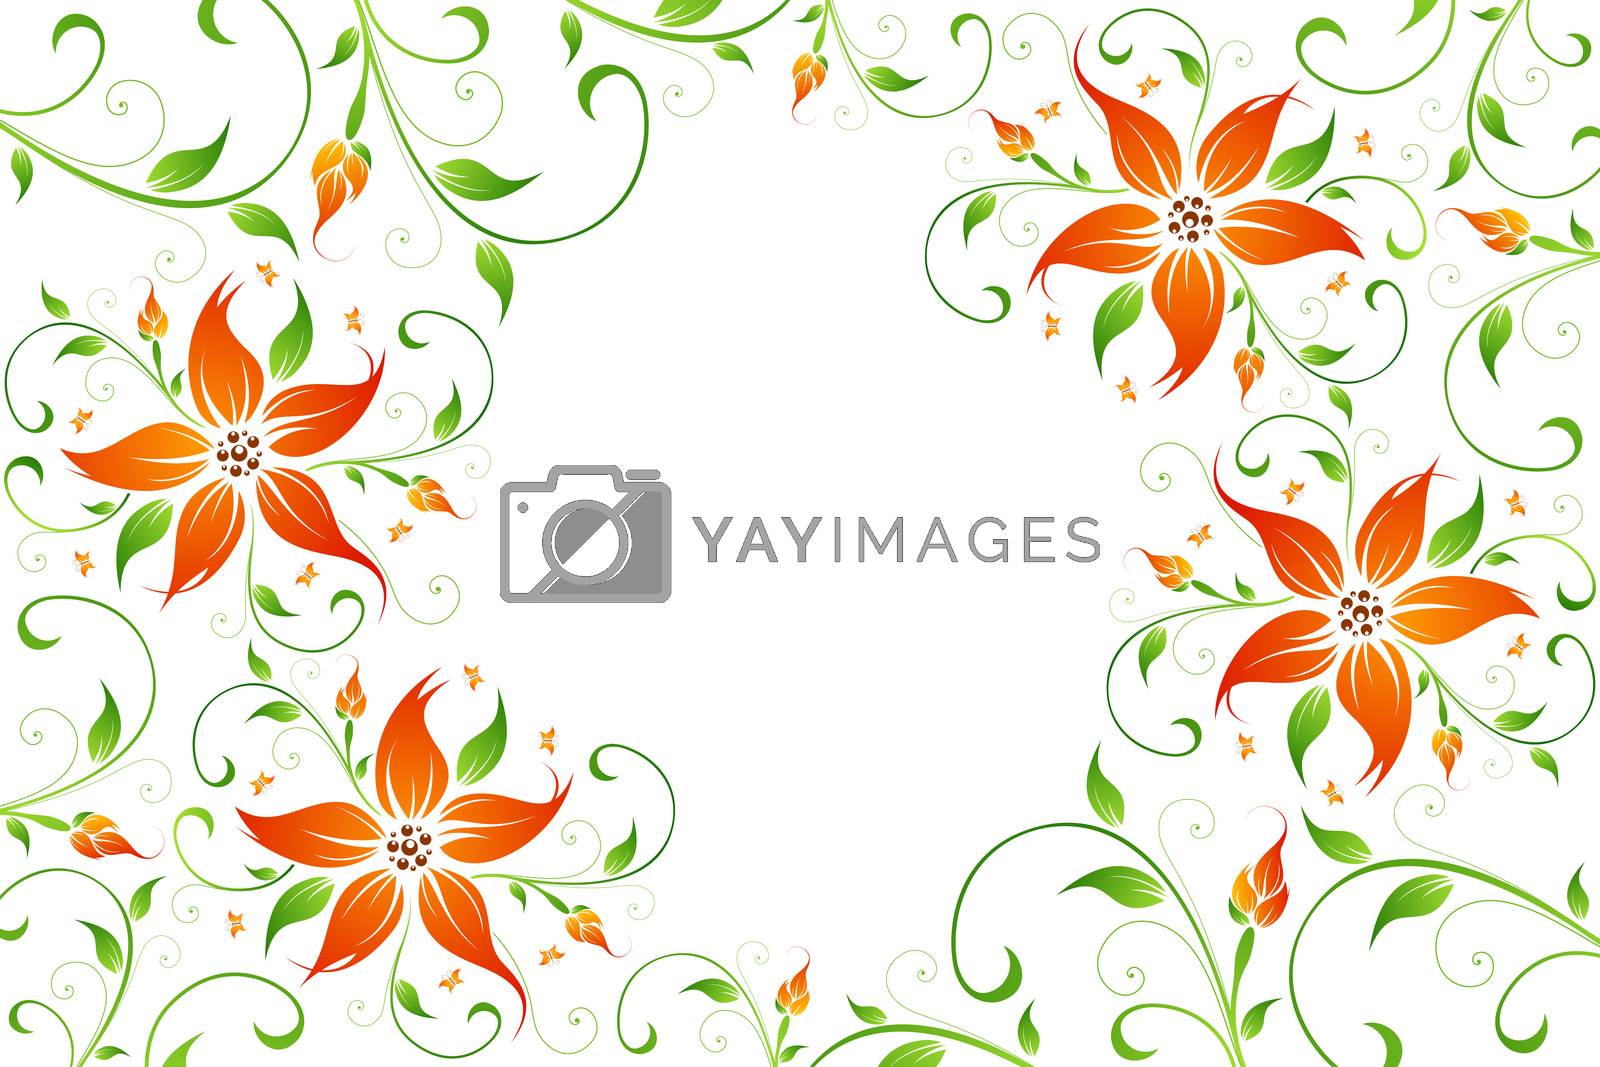 Royalty free image of Abstract vector flower background with butterfly by WaD